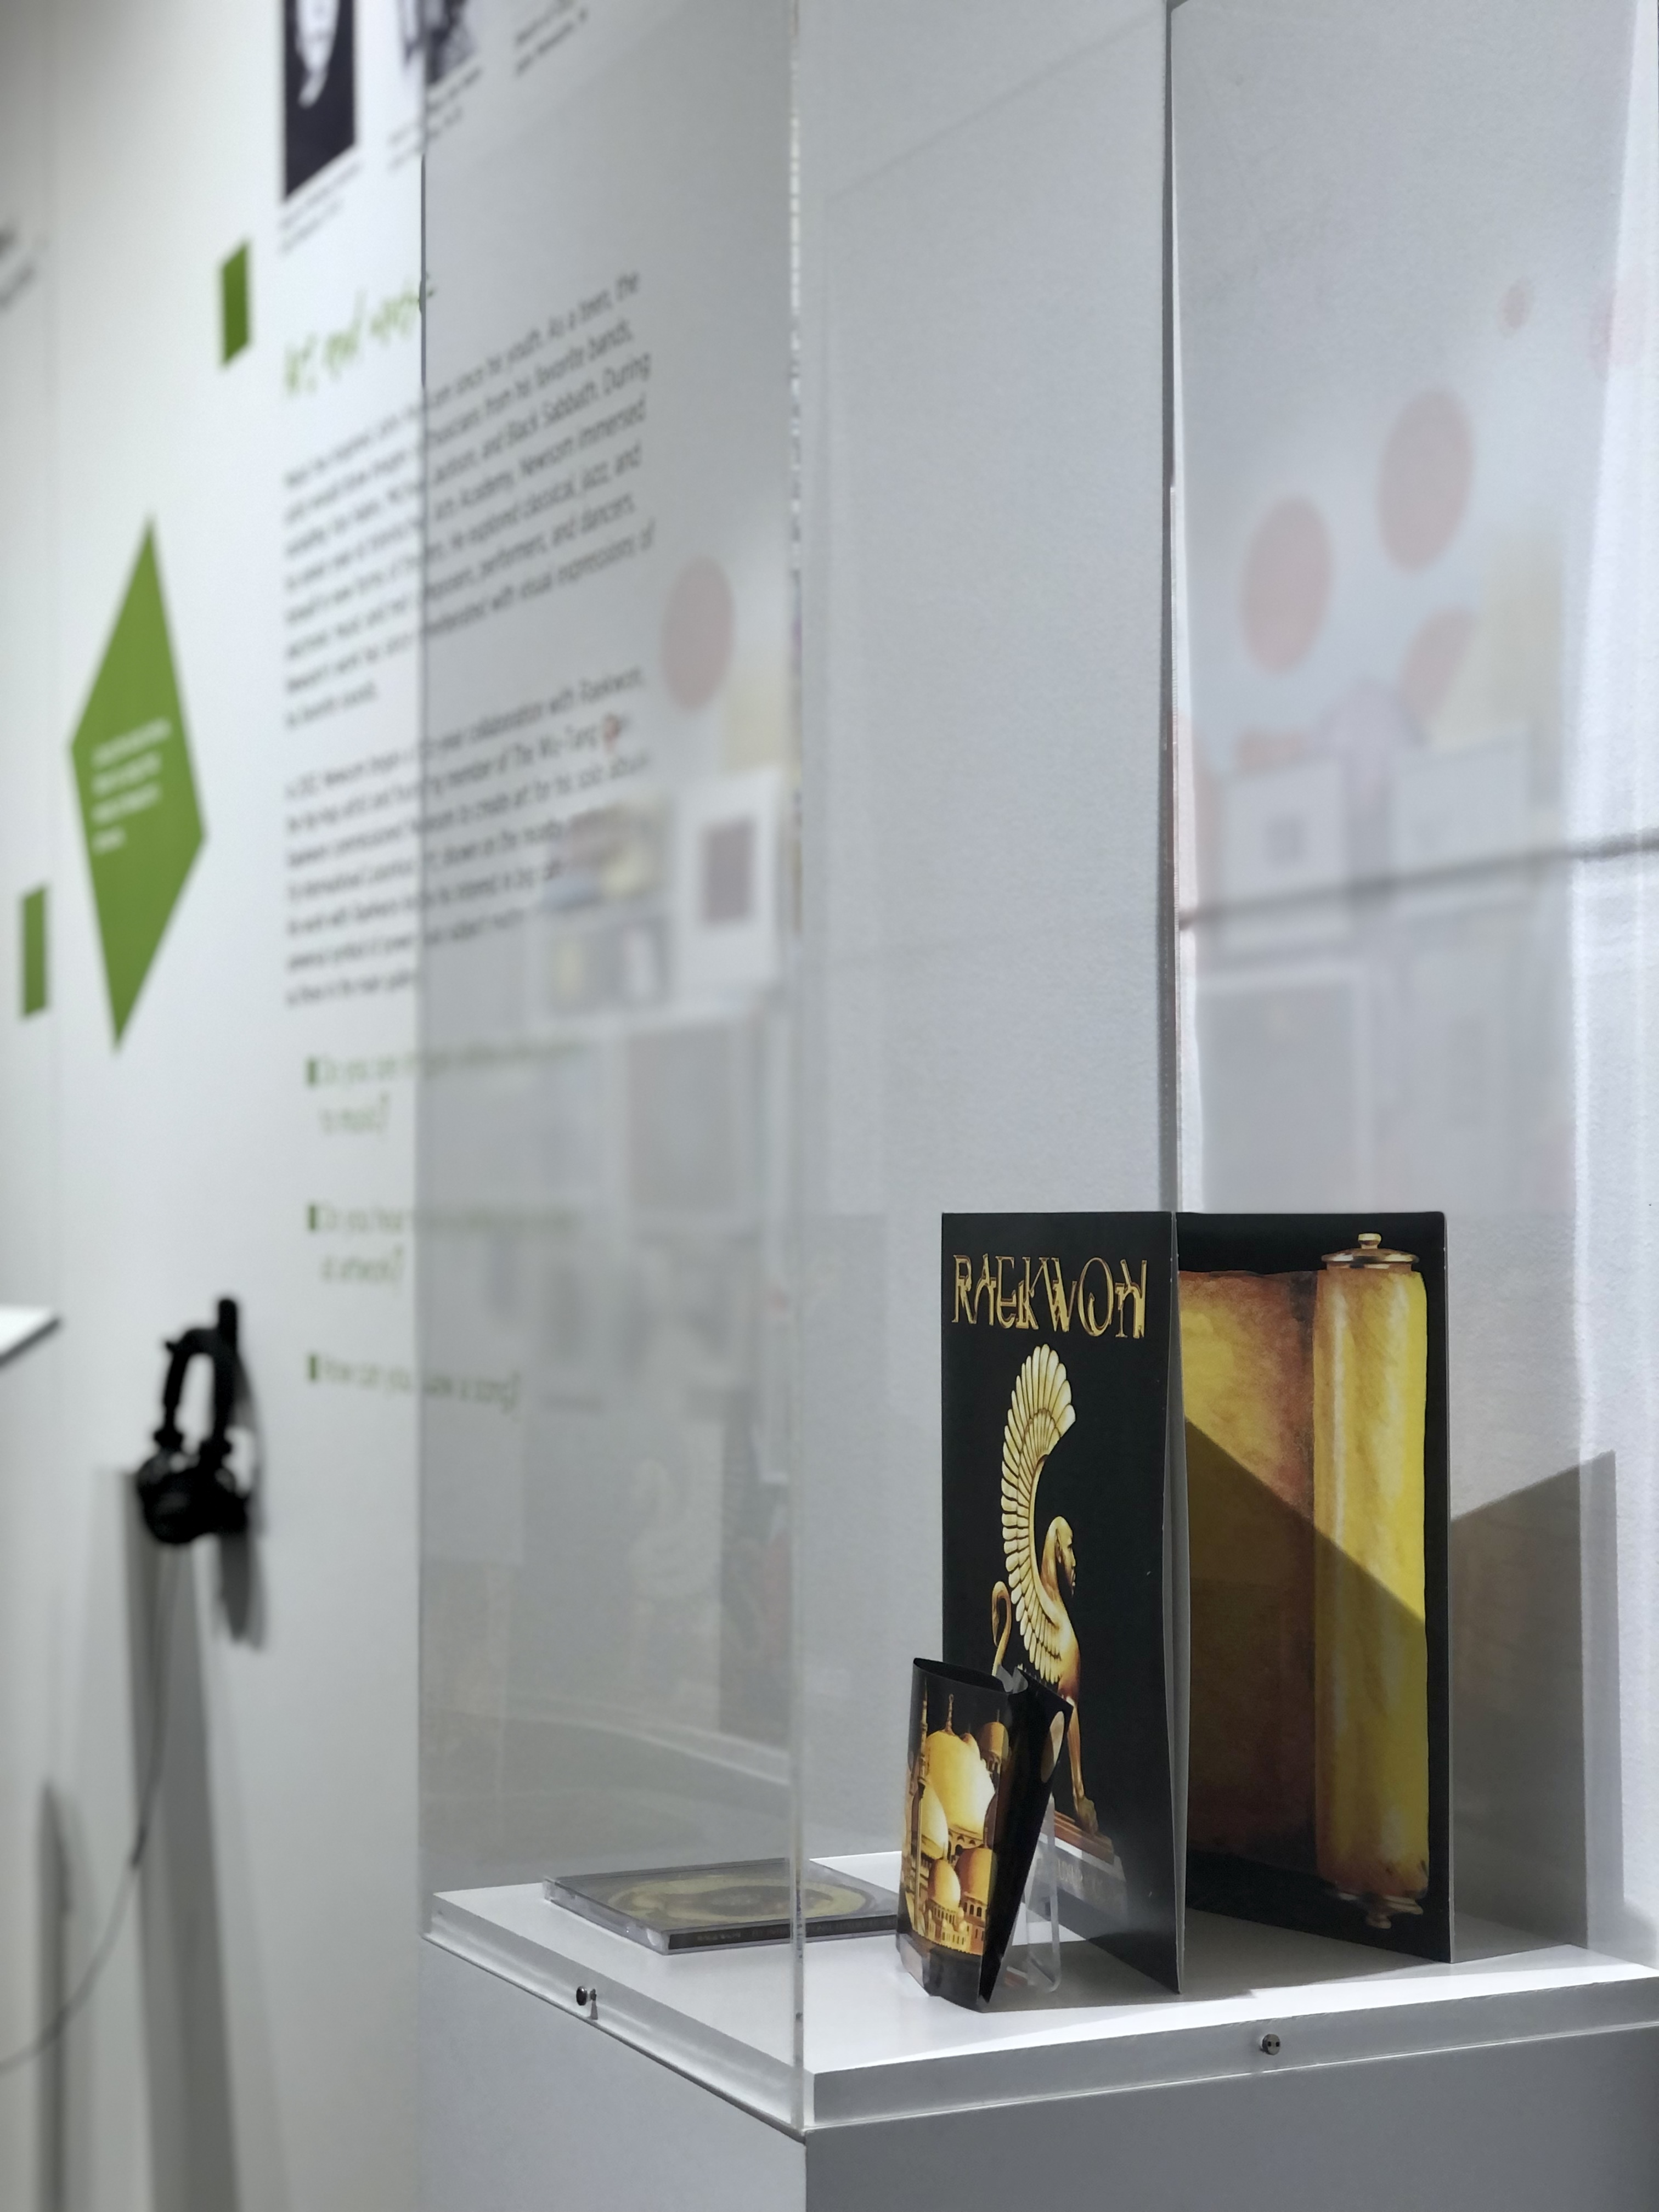 A glass case sits against a white wall. Inside is a vinyl album and CD with a black background and a golden winged creature. We can see green squares and text on the wall to the right, as well as a kiosk with headphones.